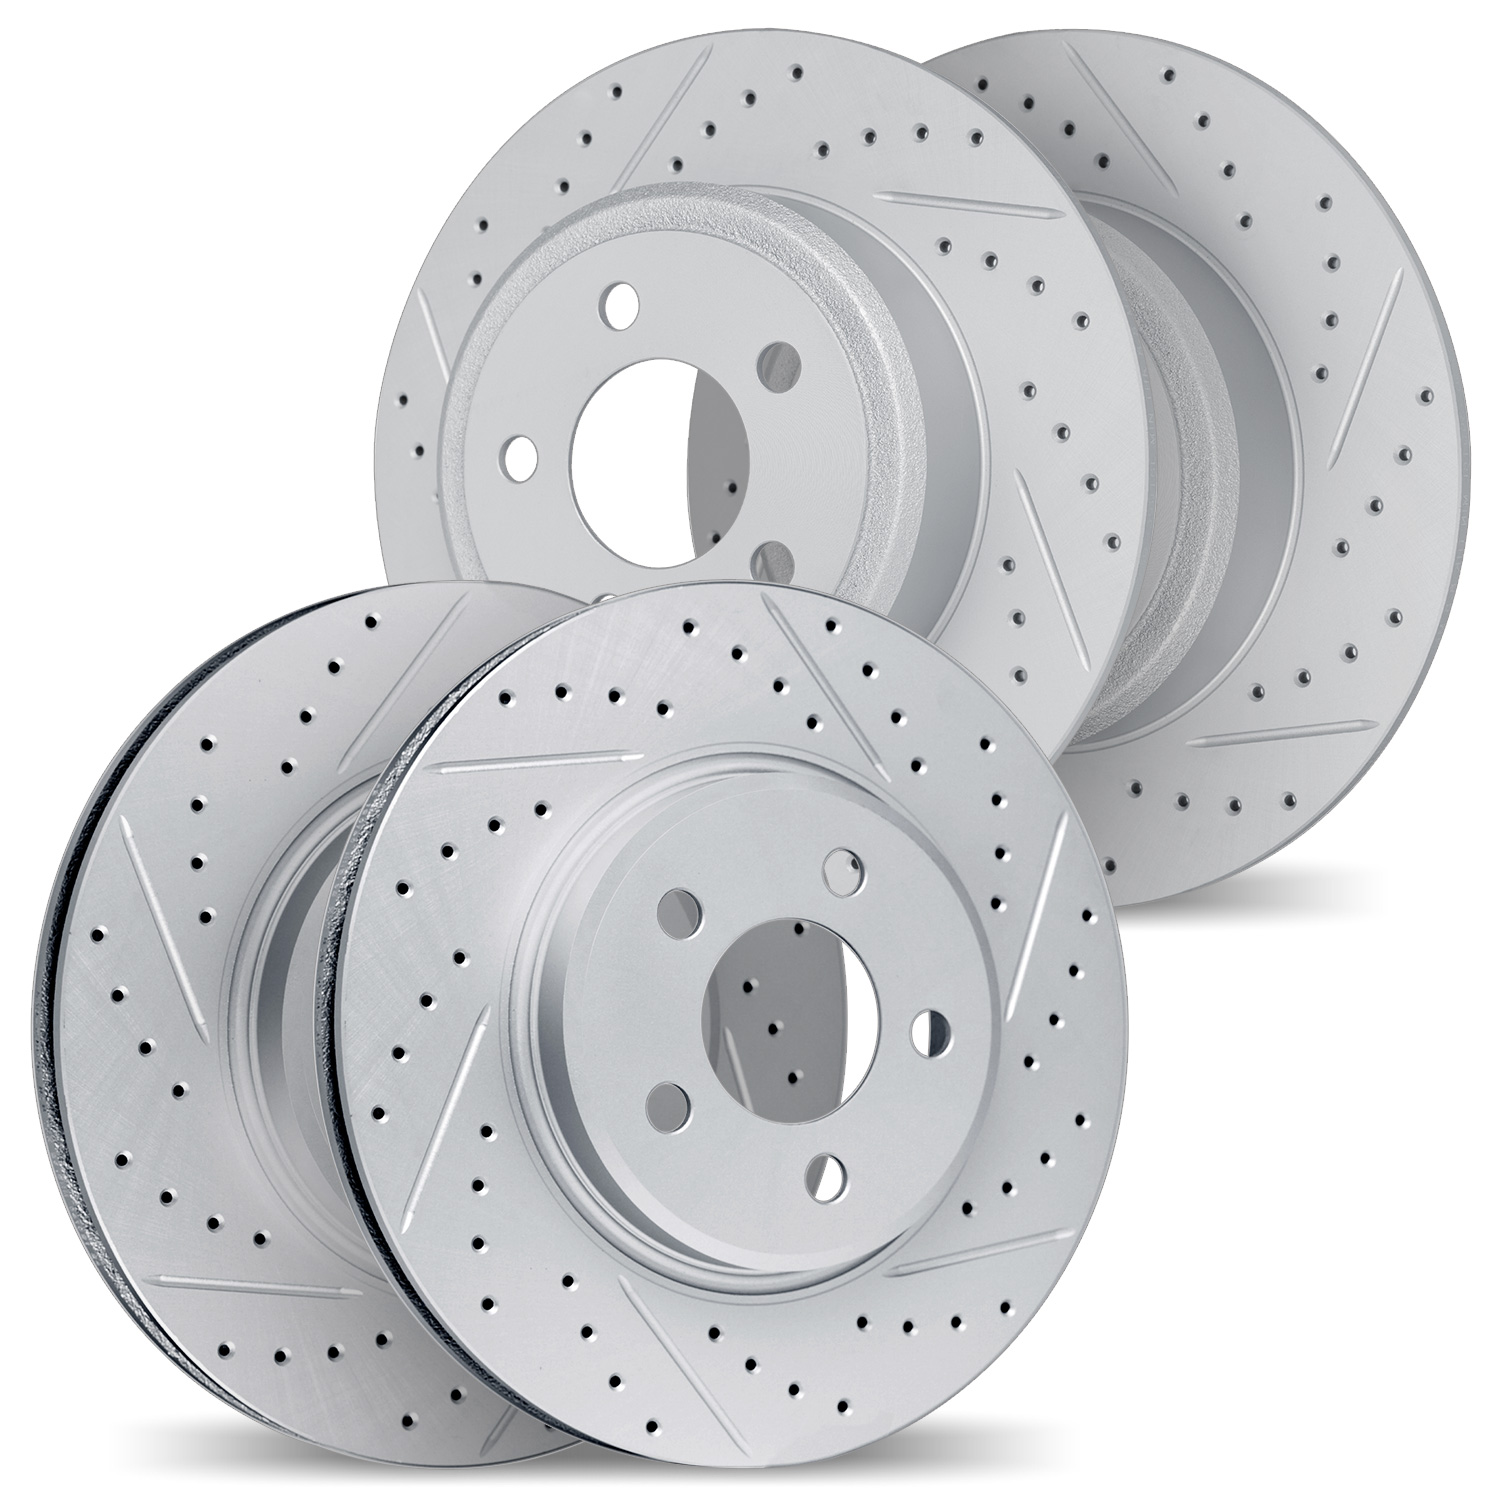 2004-42014 Geoperformance Drilled/Slotted Brake Rotors, 1993-1998 Mopar, Position: Front and Rear